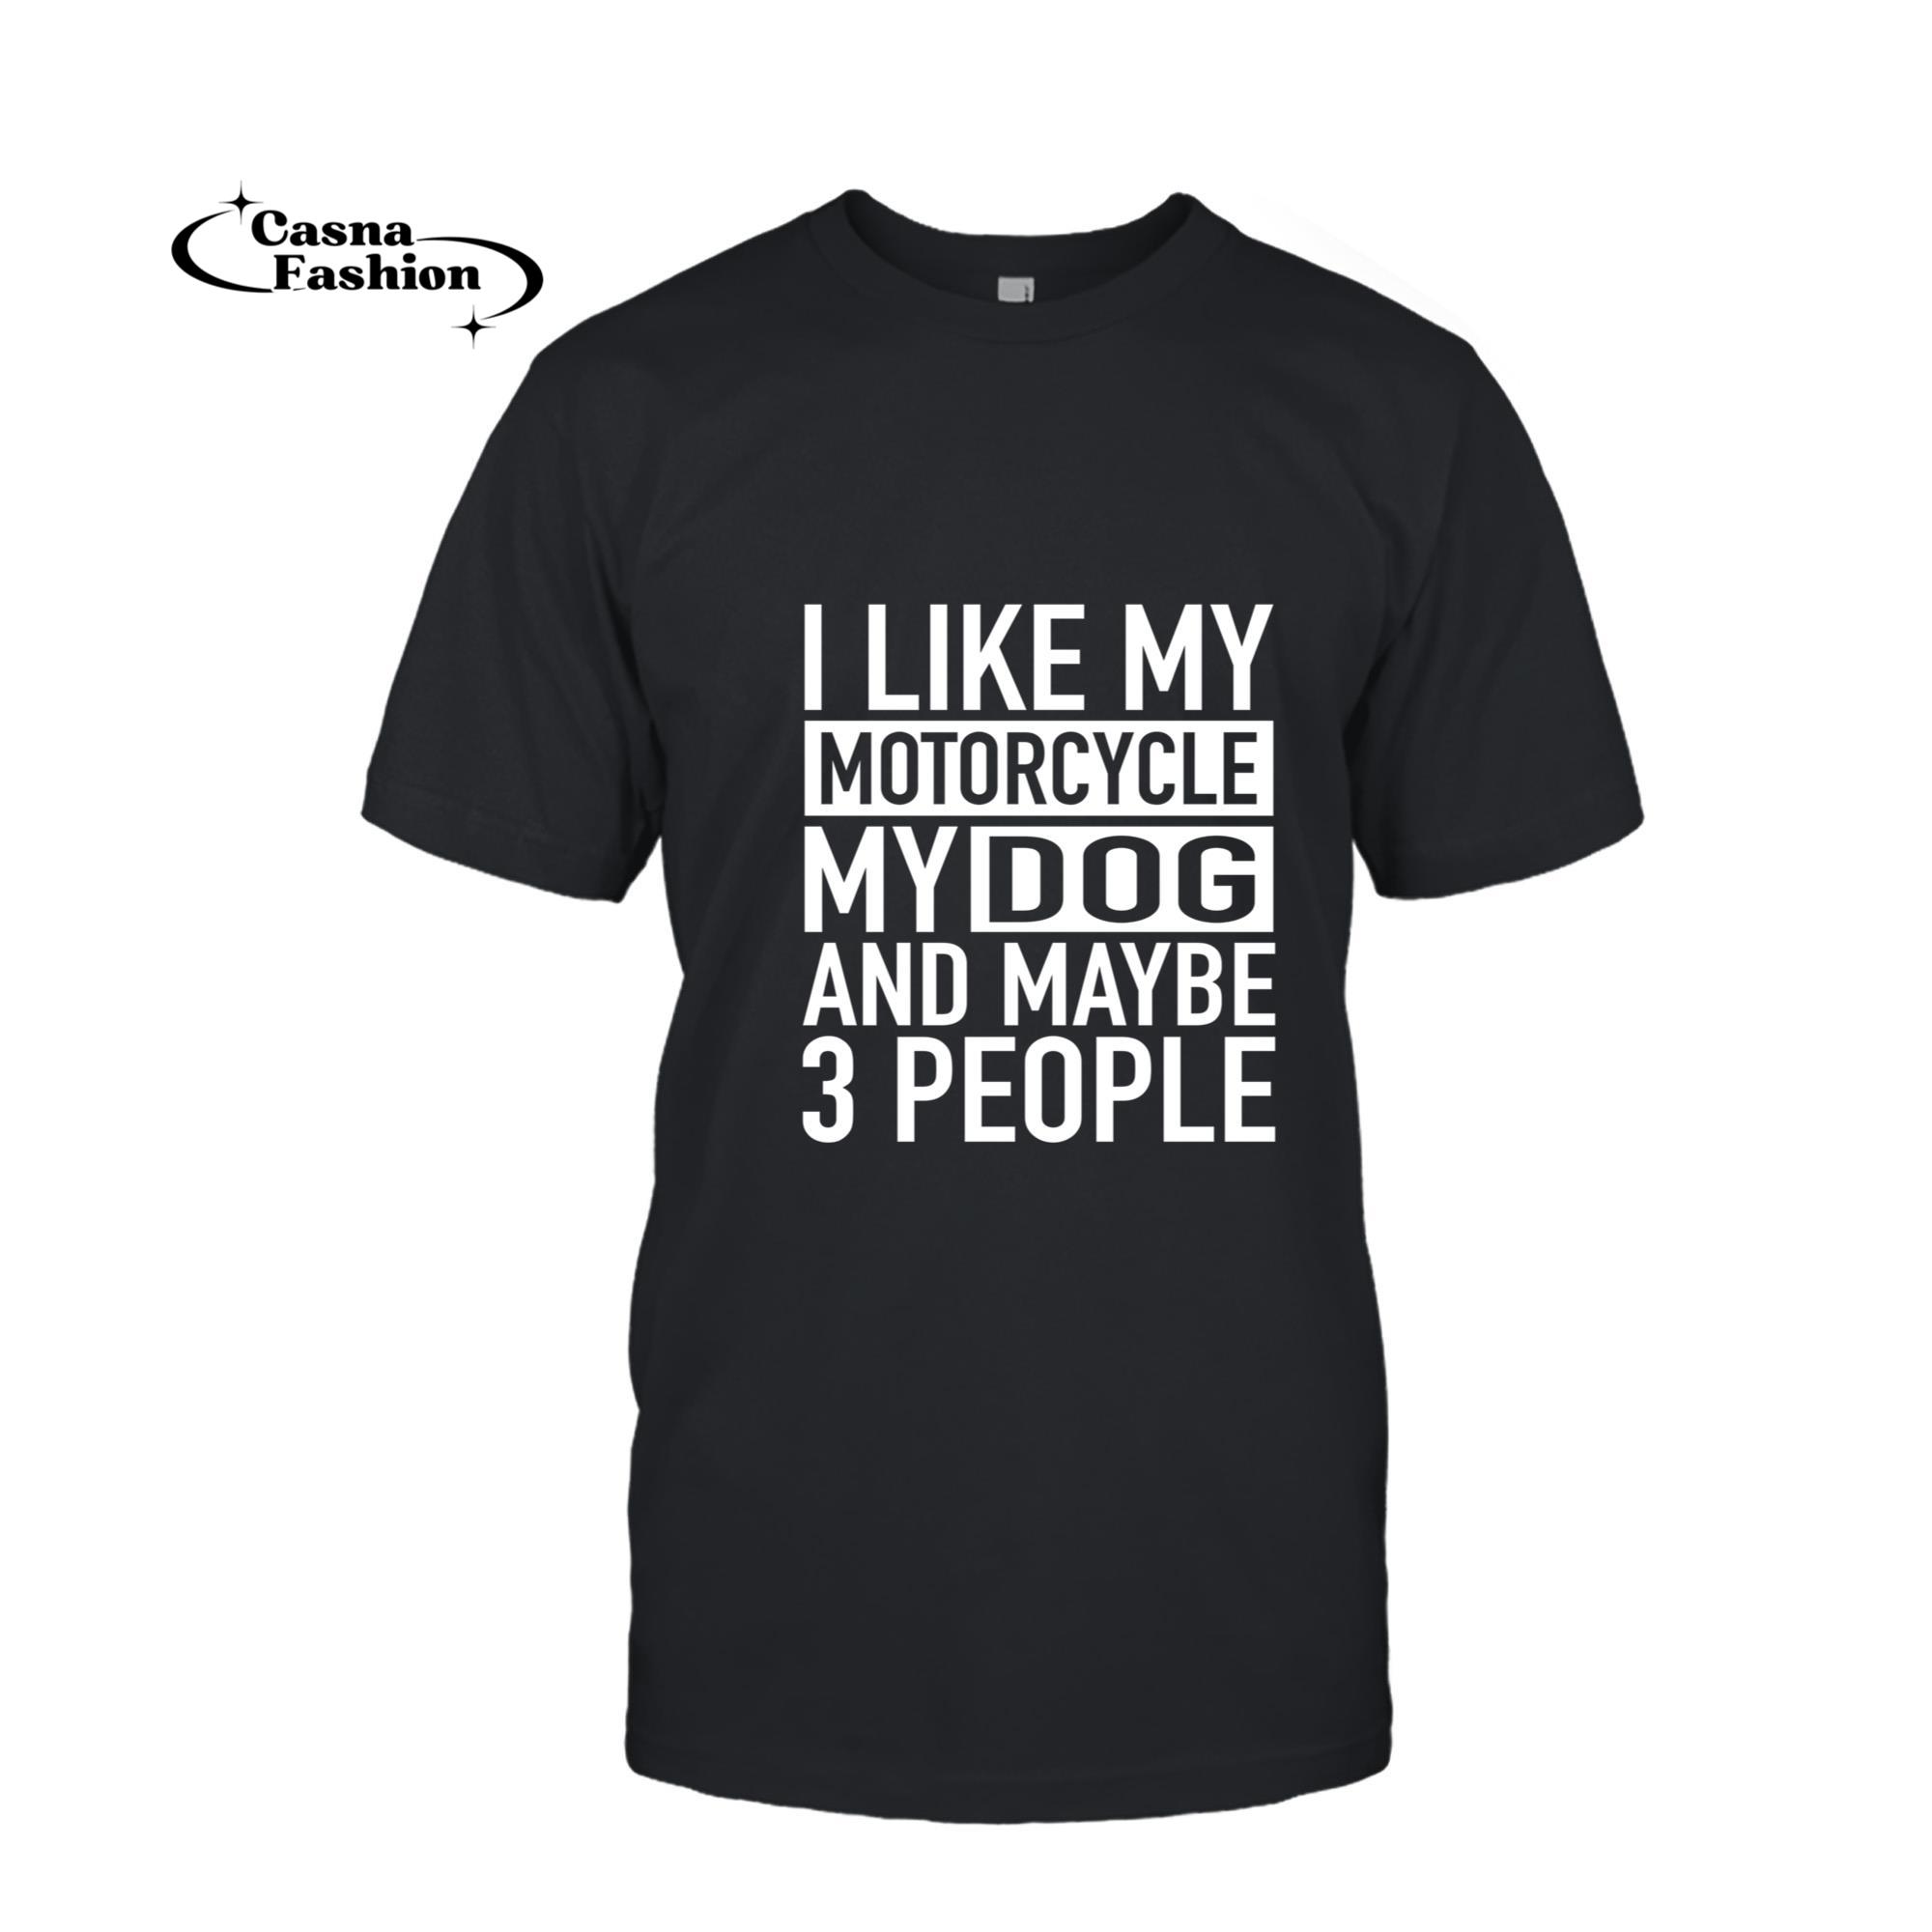 casnafashion_T-shirt_Funny Biker Shirt I like My Motorcycle, Dog & Maybe 3 People Pullover Hoodie_T-shirt_Black